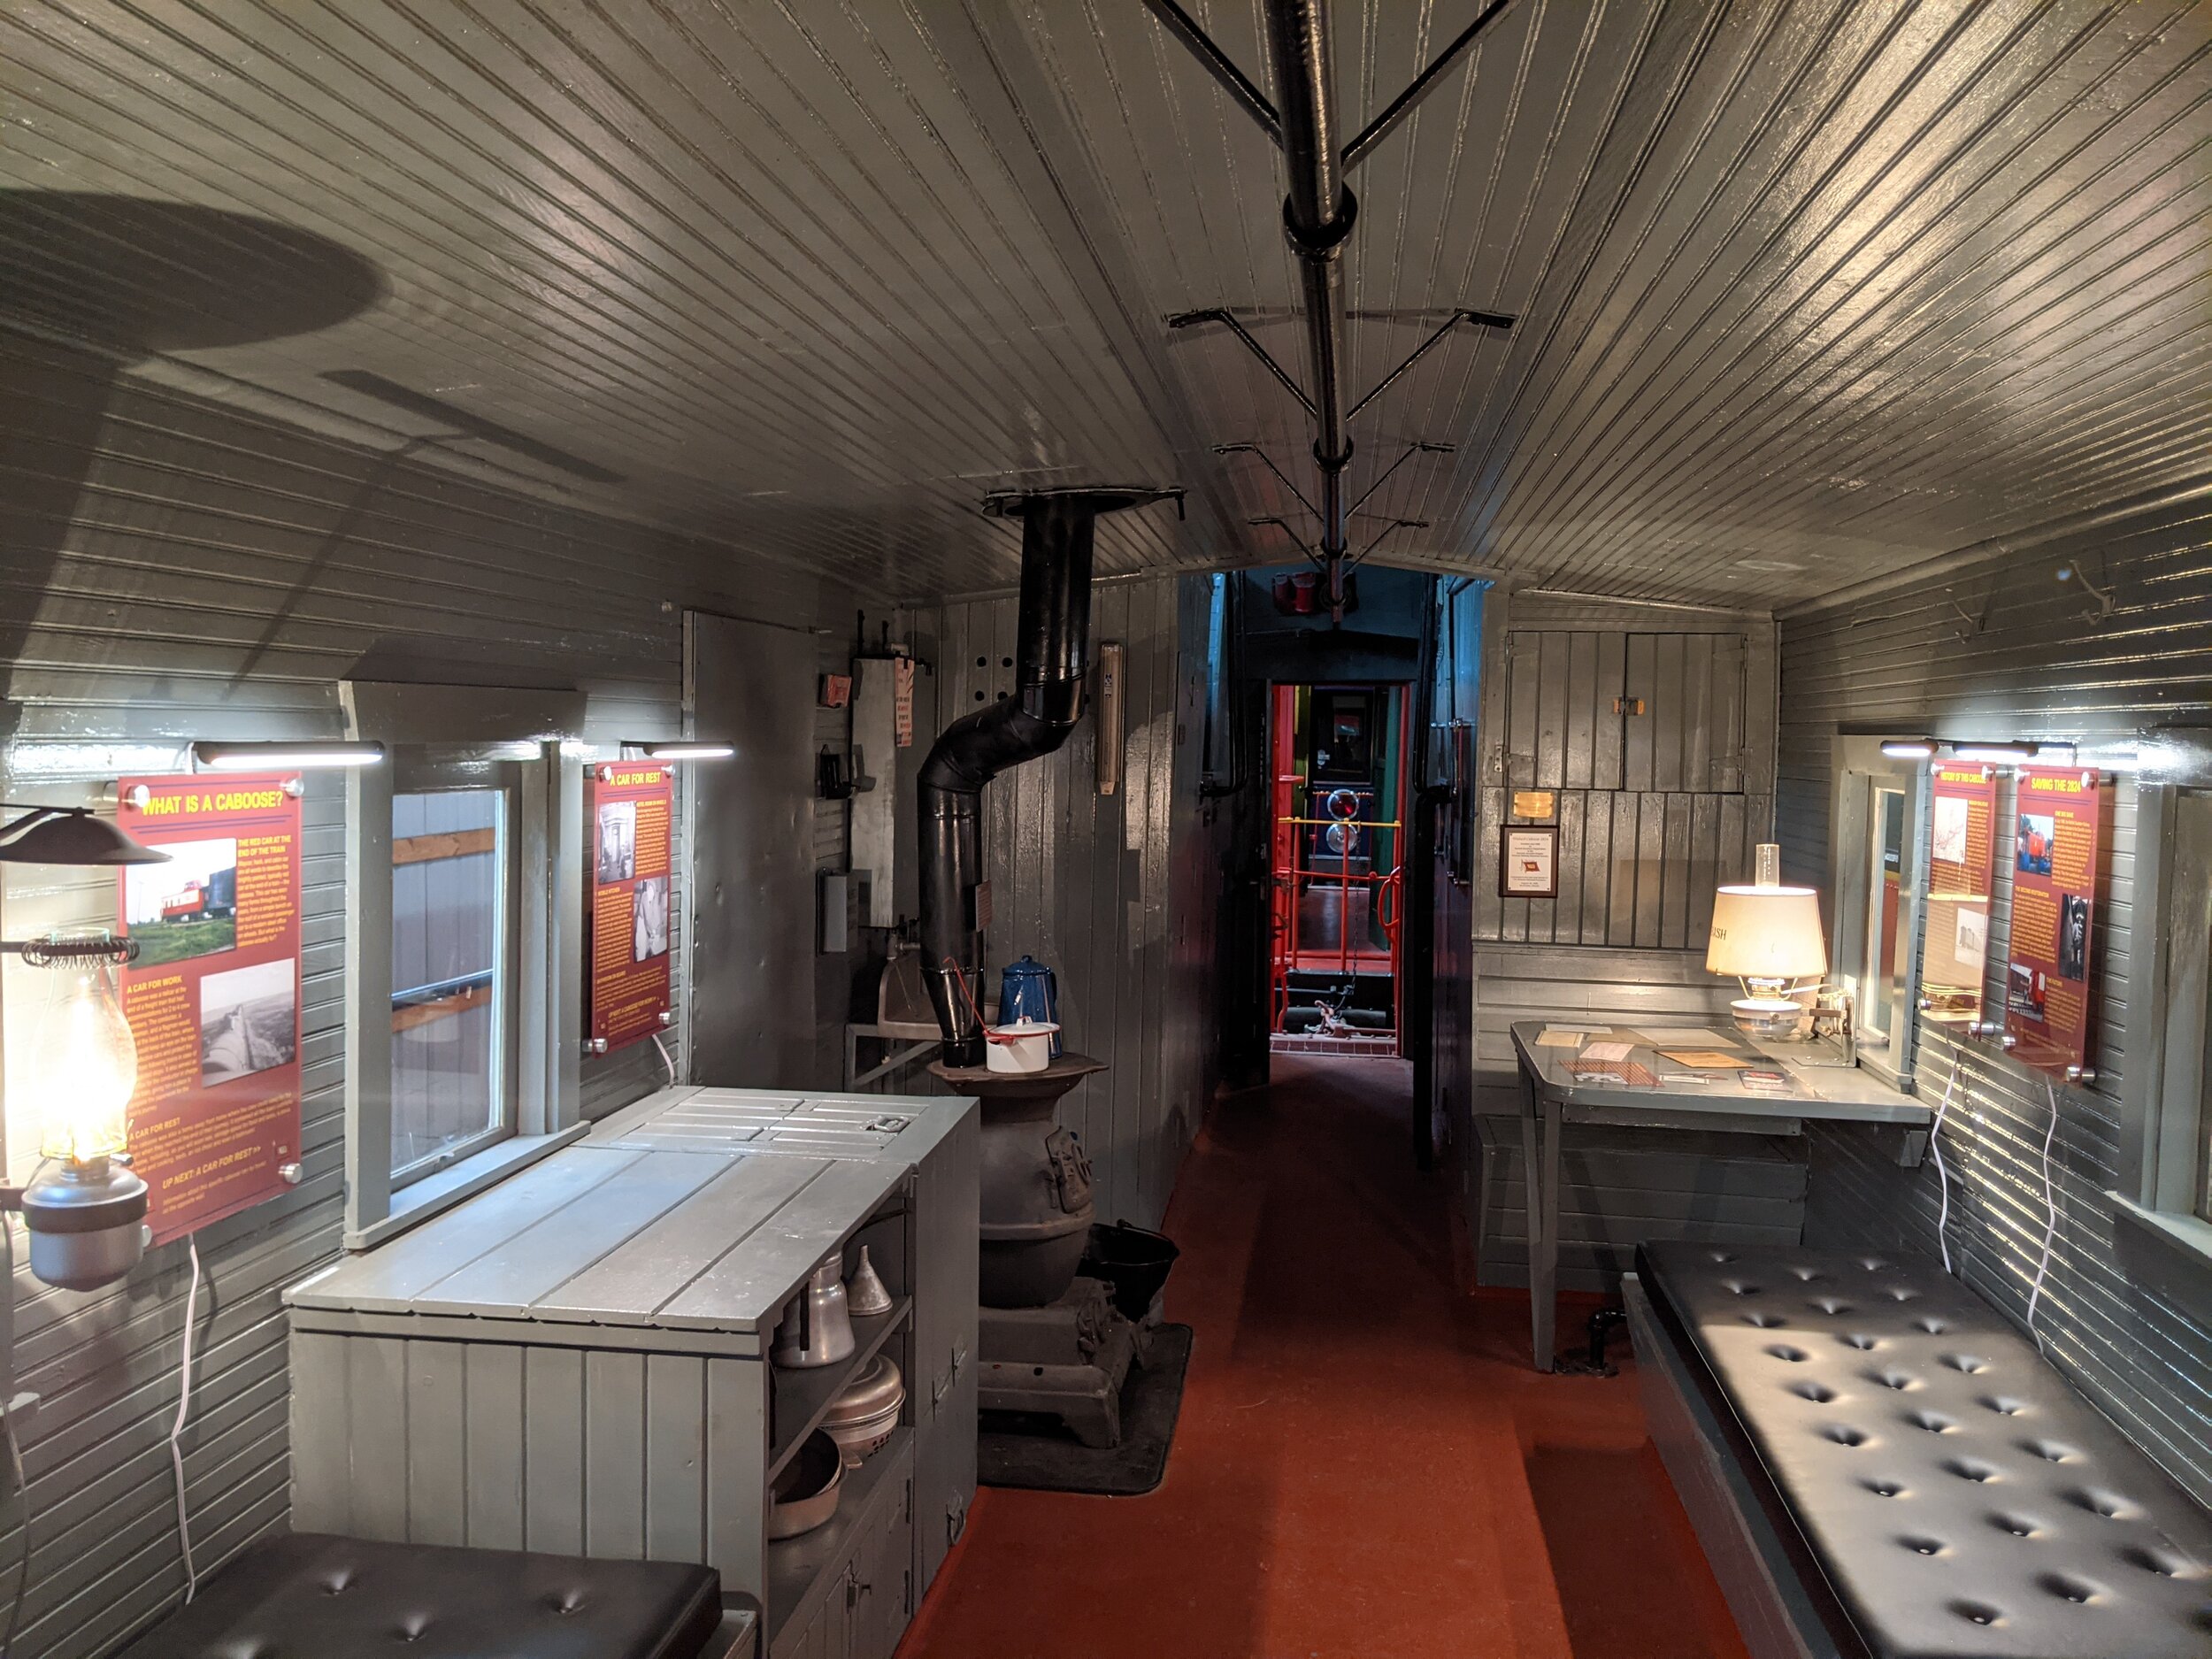  The restored interior of the caboose.  